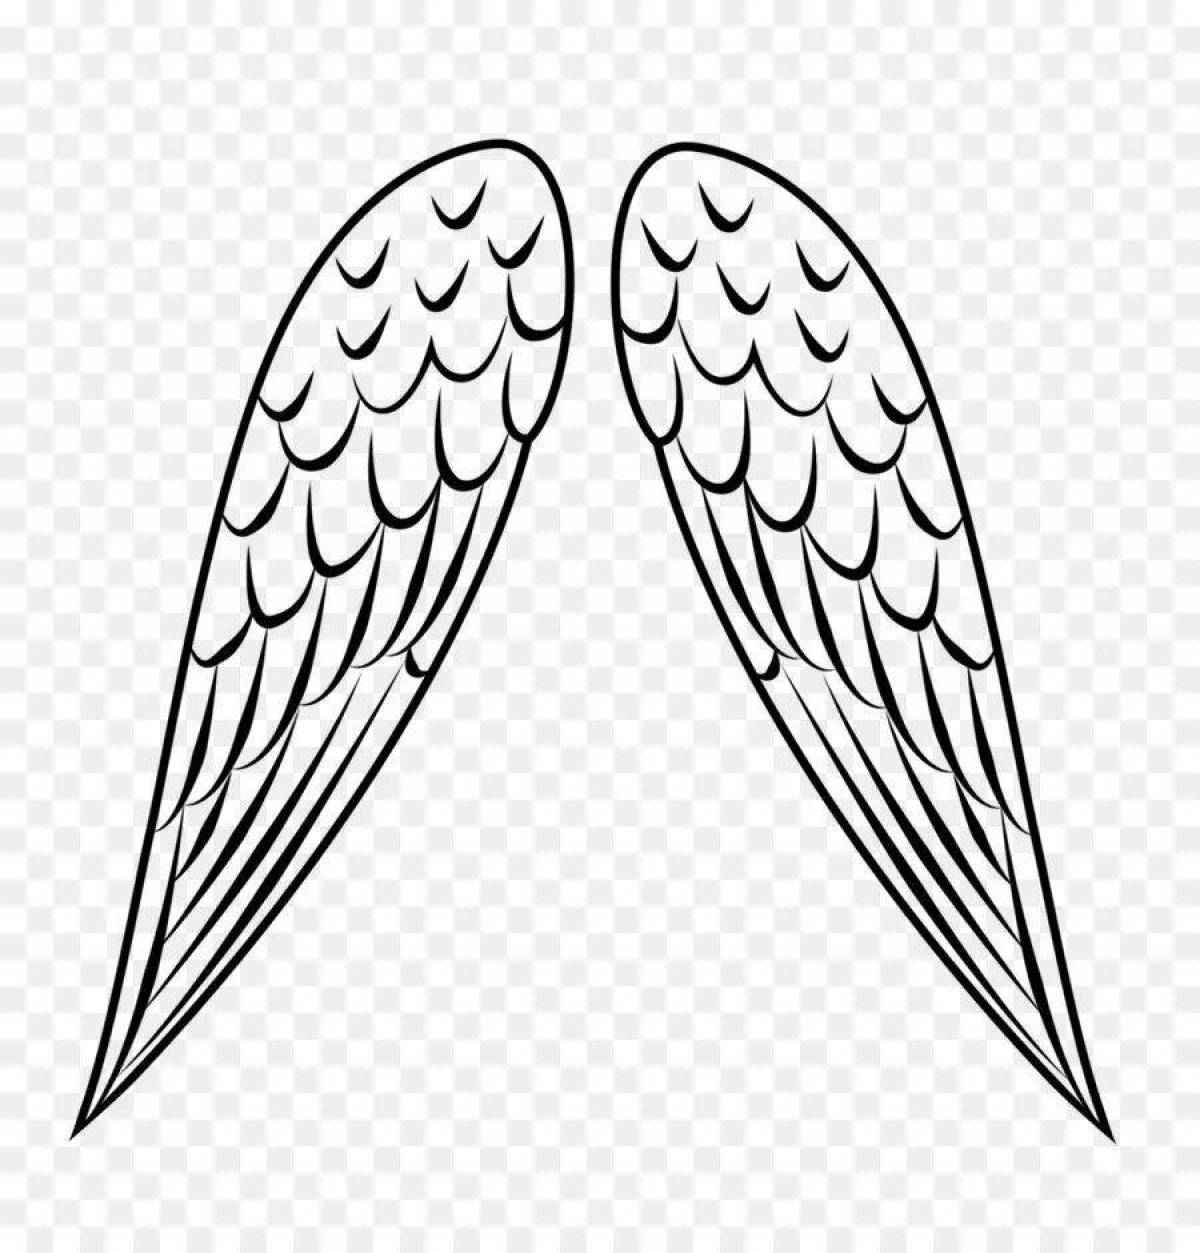 Coloring pages wings